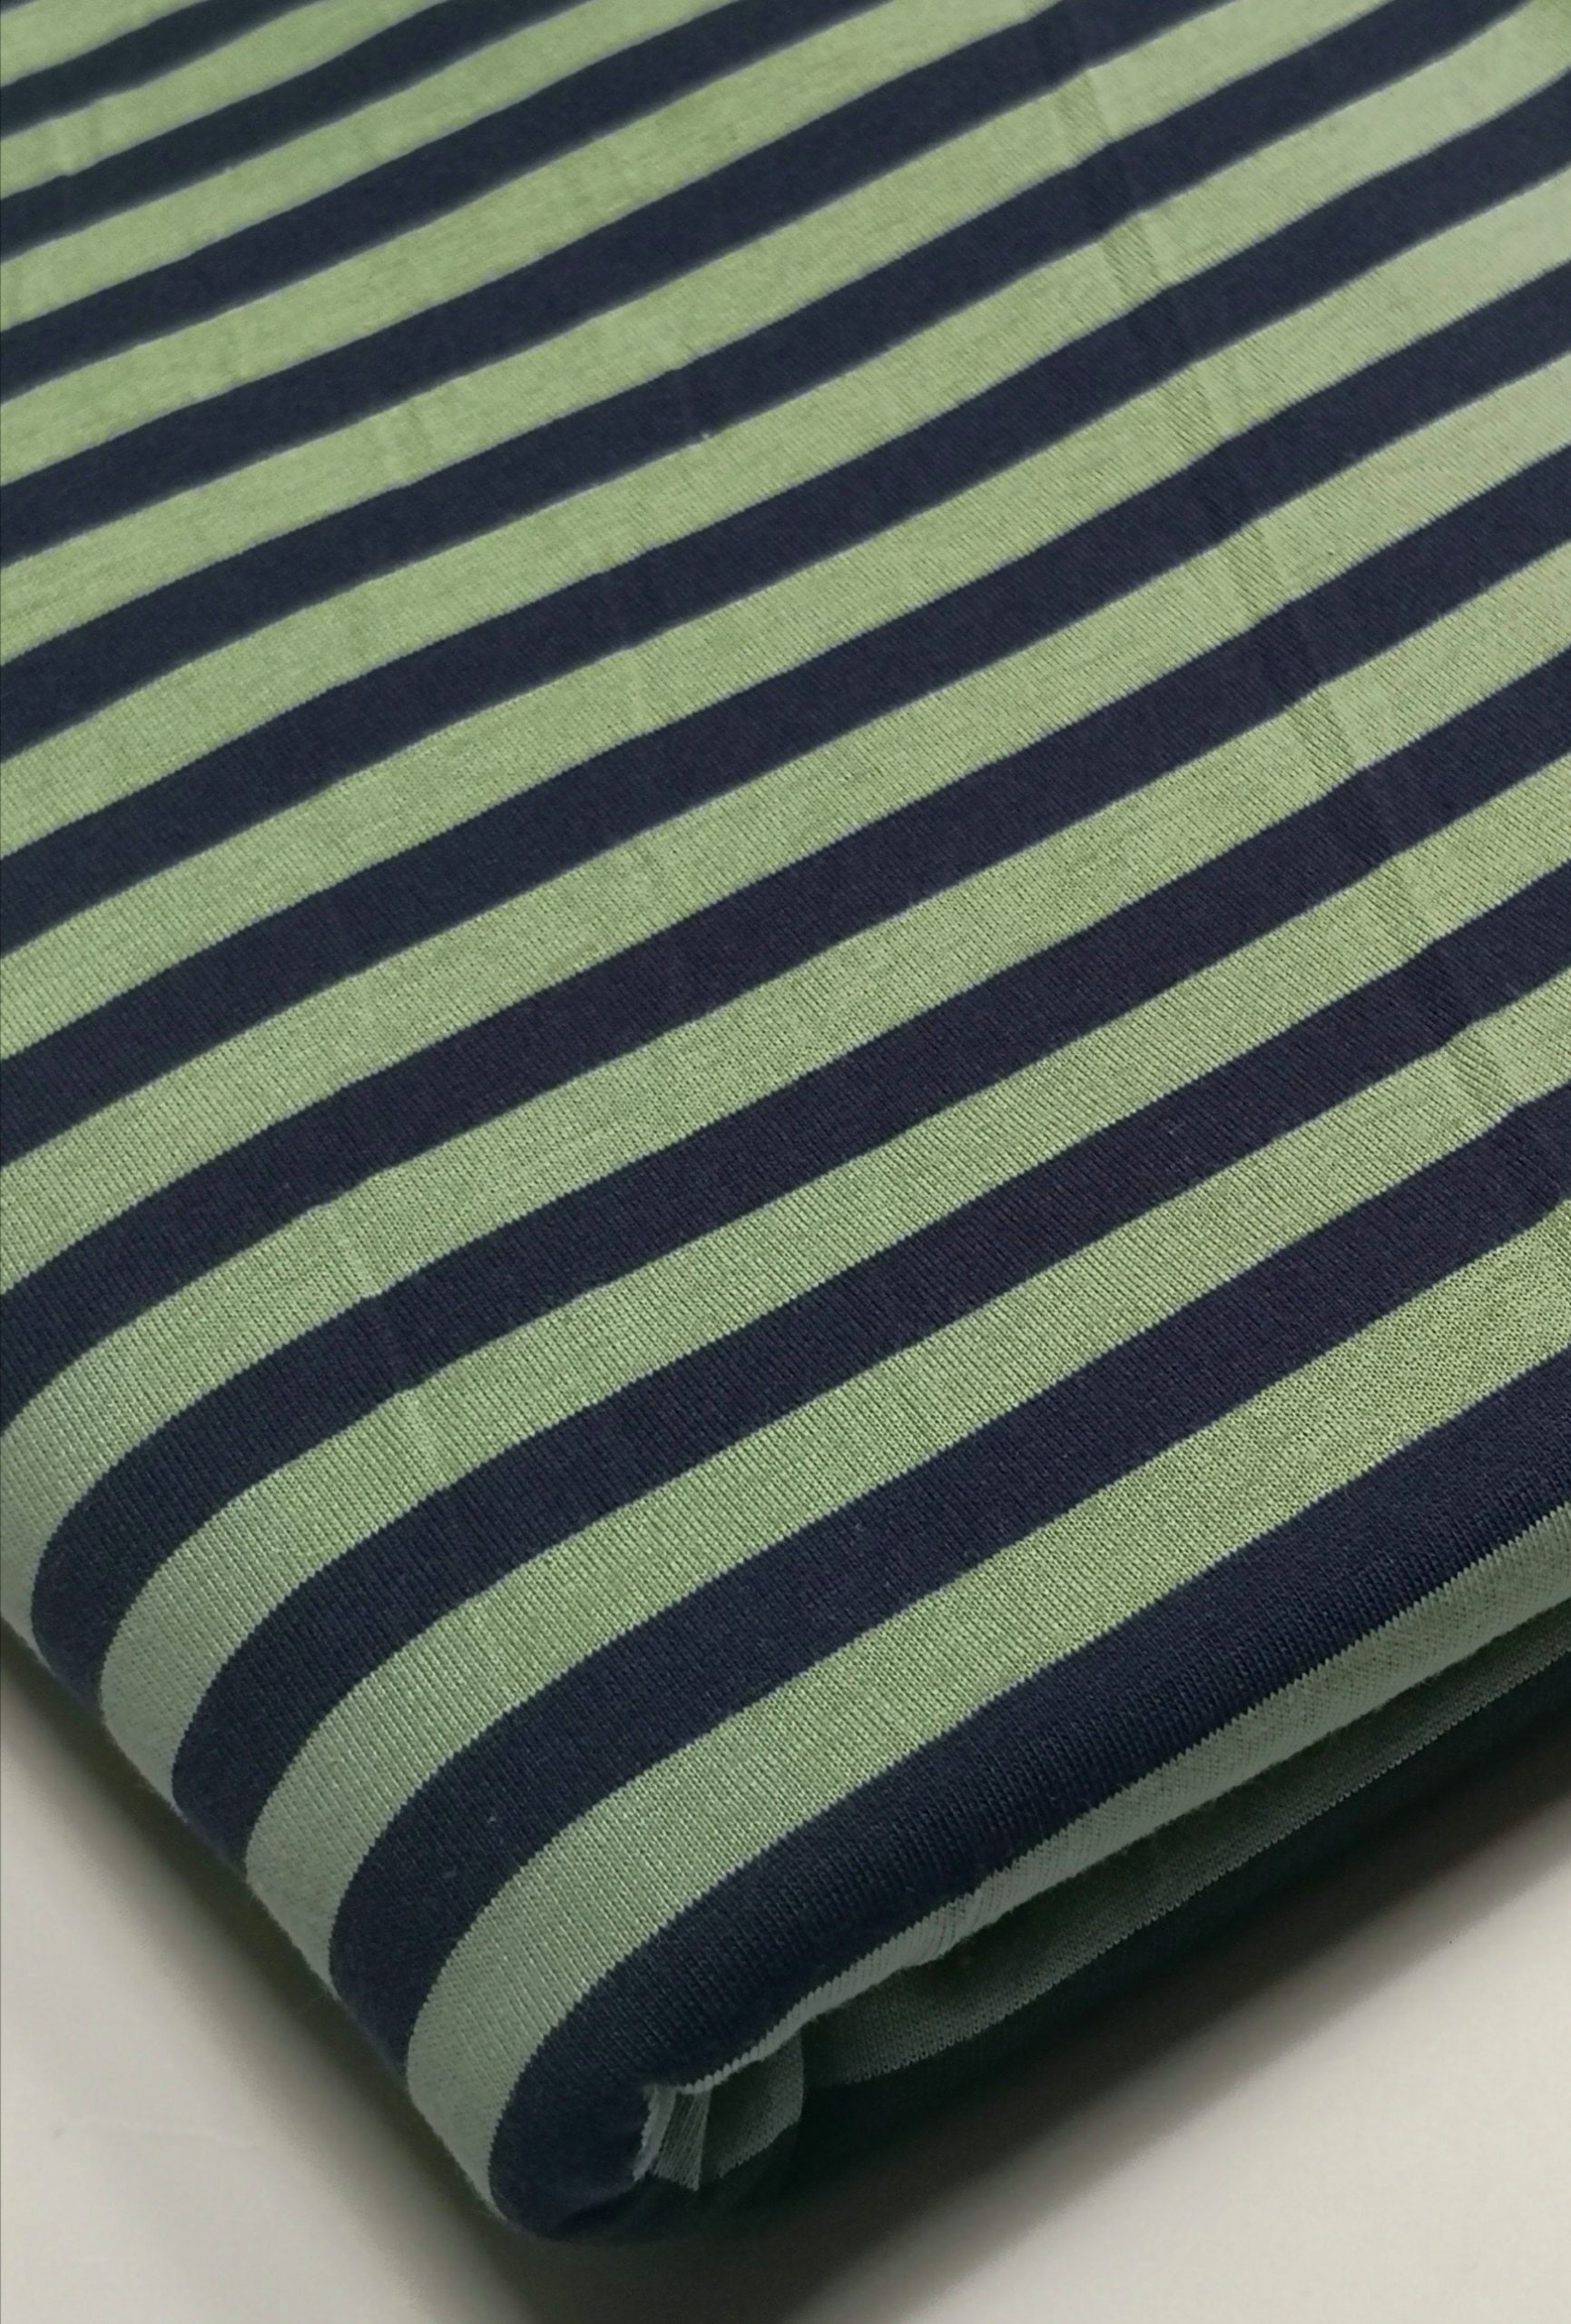 **SALE** Cotton Knit – Olive and Navy Blue Stripes | FabricStore